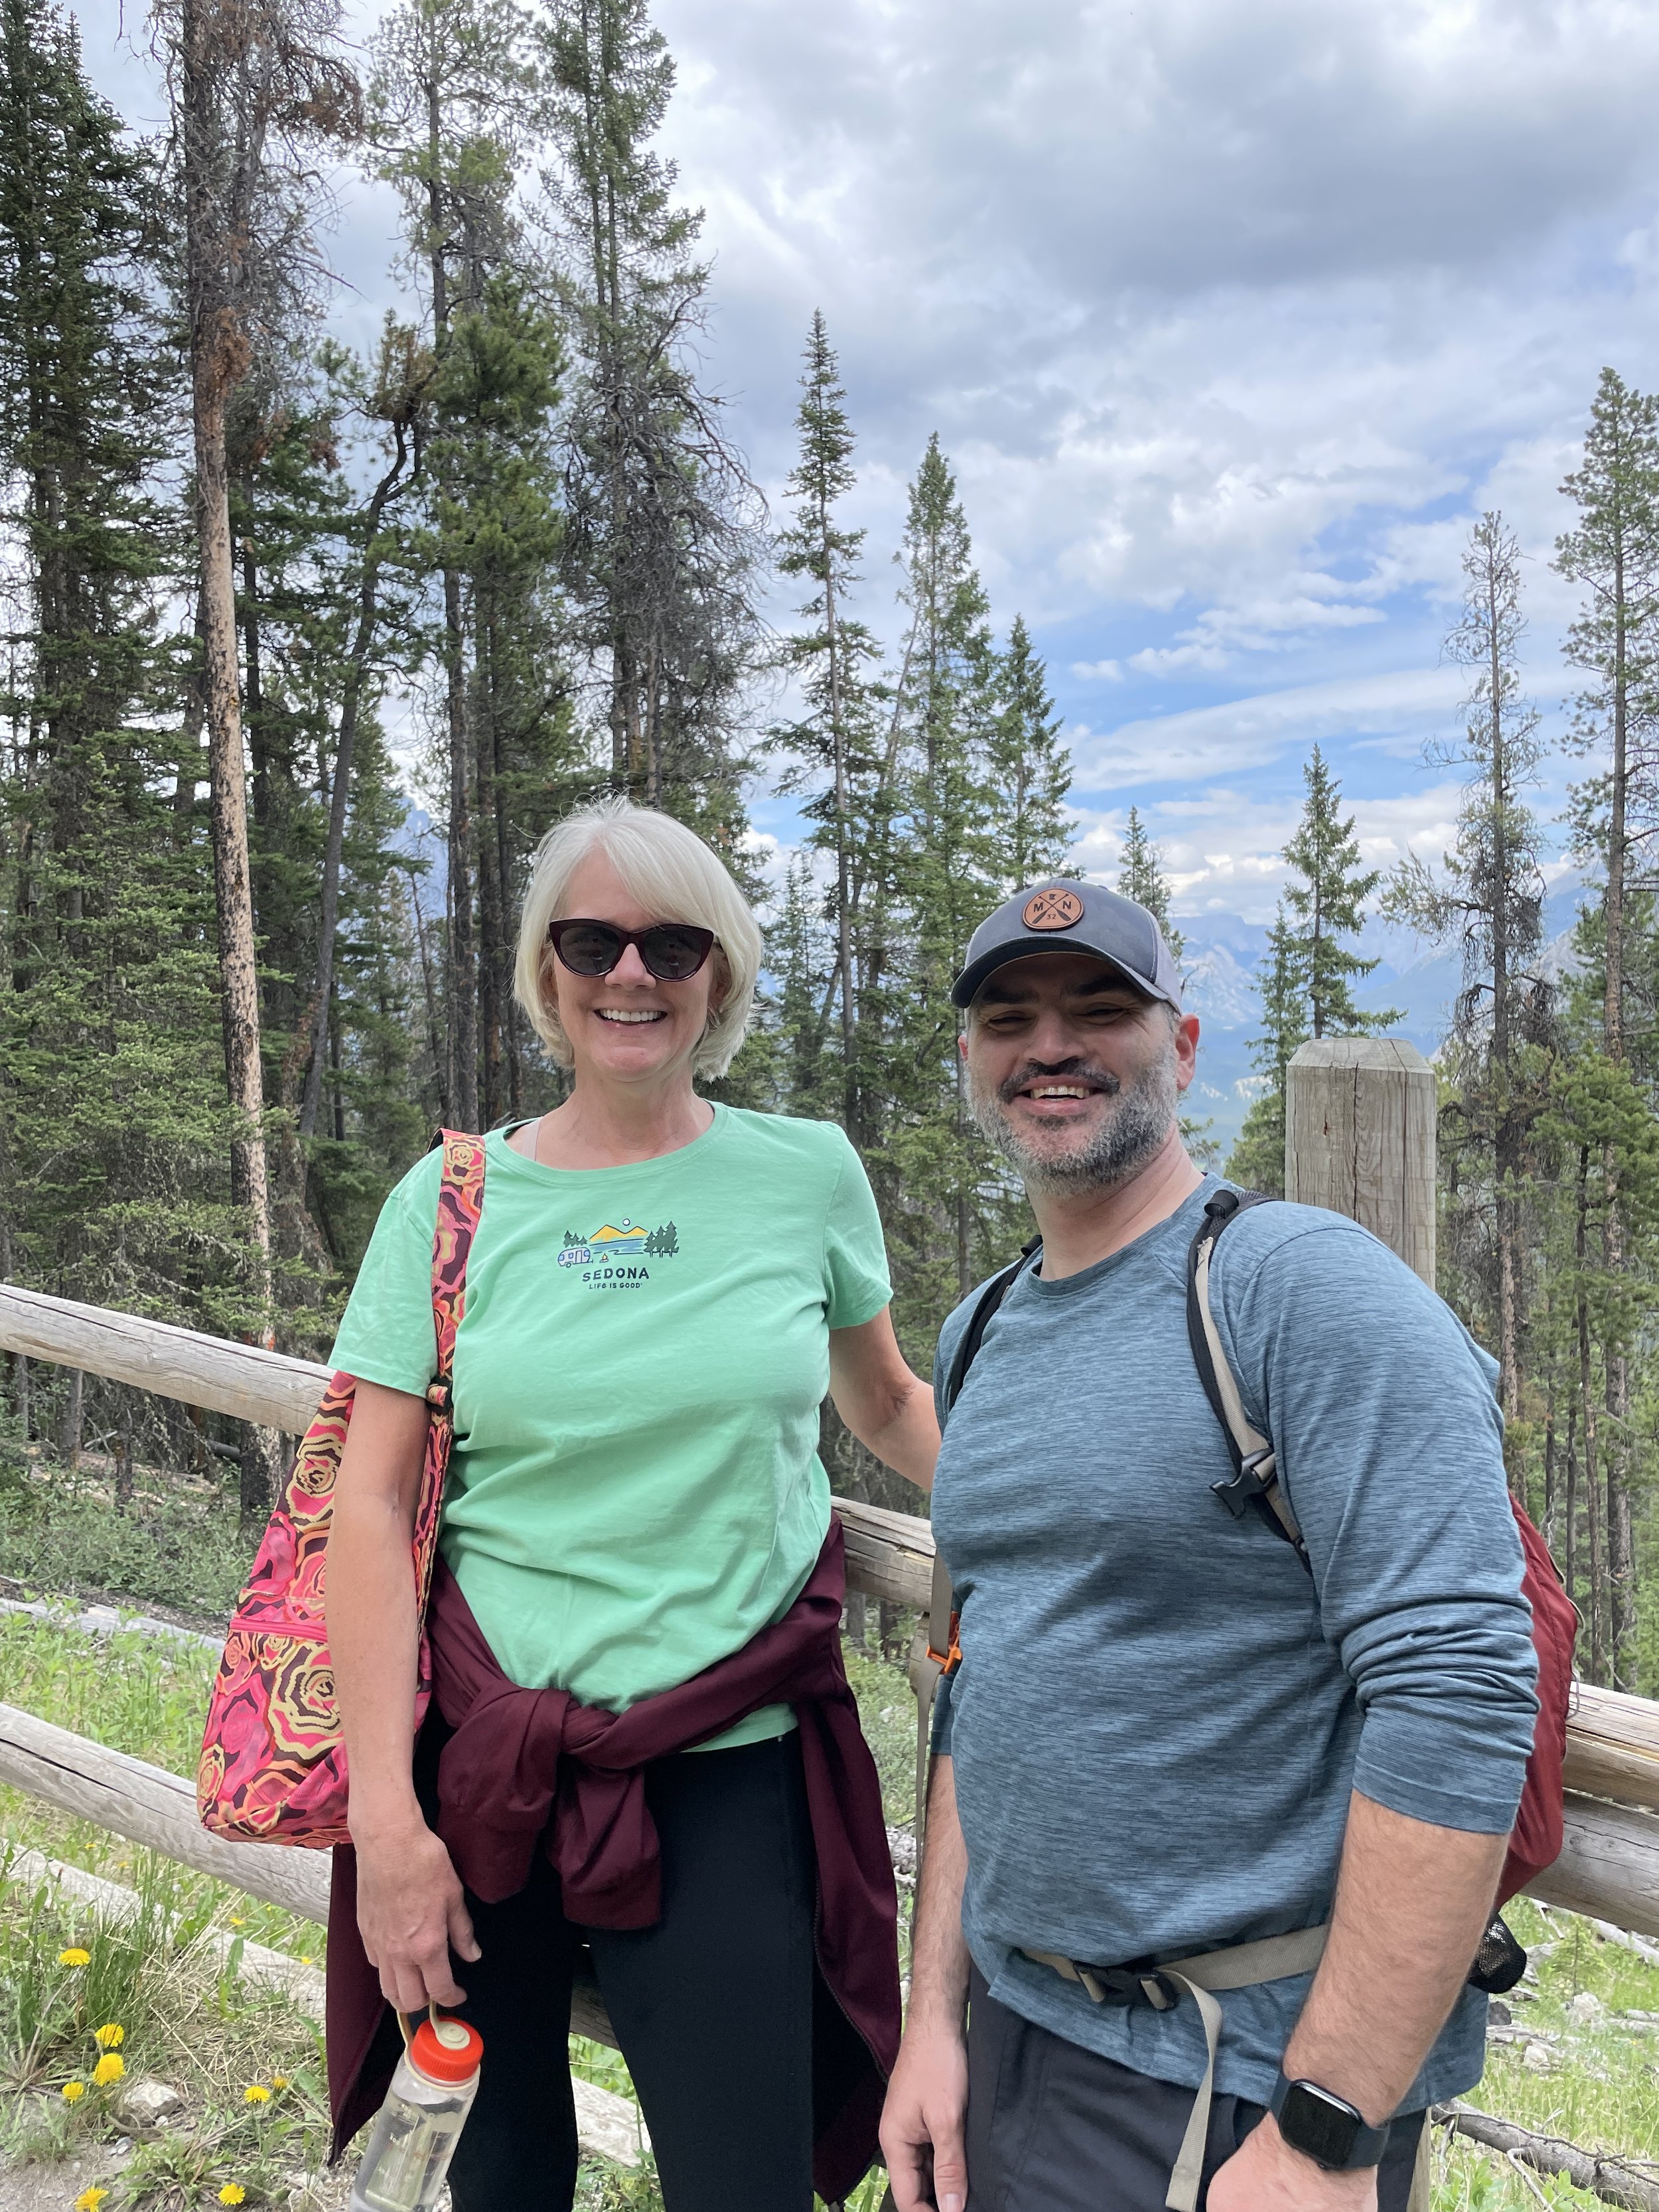  ID Core's Sue Everson-Rose and Drew Busch in Banff National Park, Alberta, Canada for the Academy of Behavorial Medicine Research meeting. 